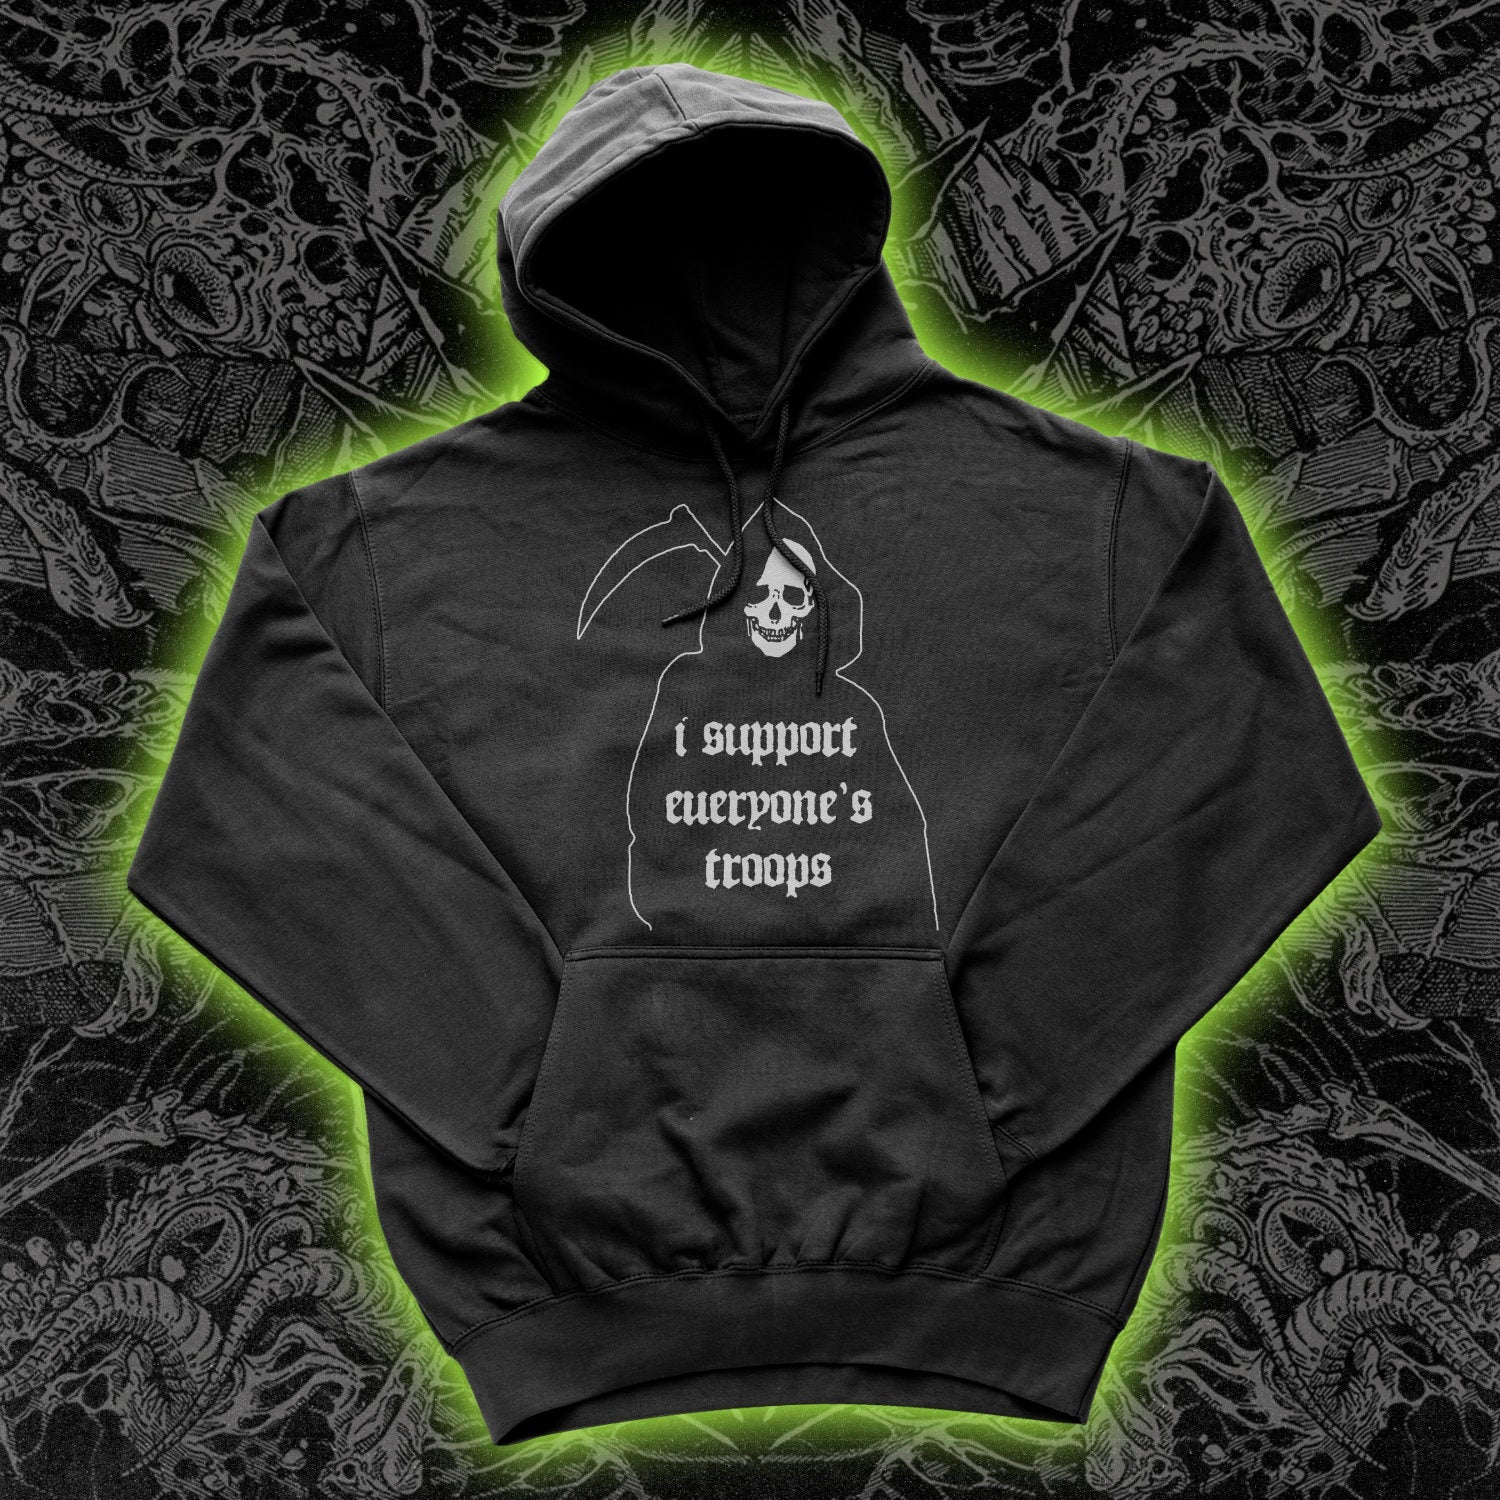 I Support Everyone's Troops Hoodie